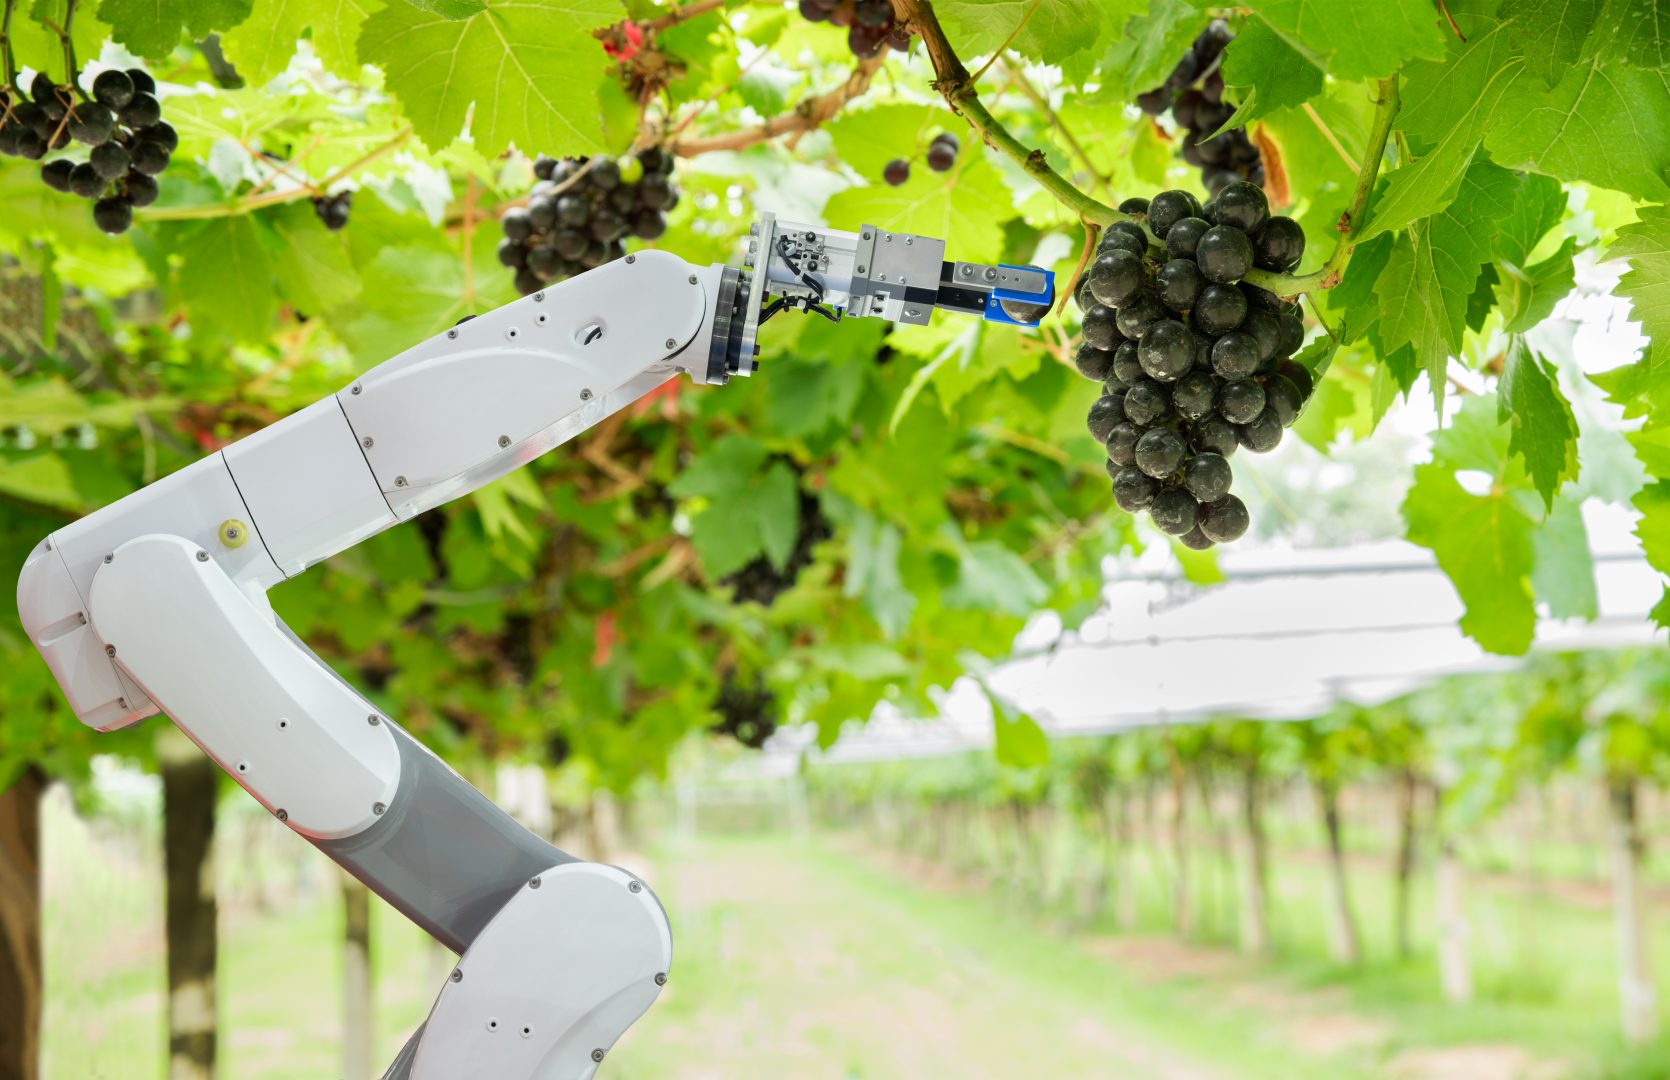 robot arm controlled by TeamViewer IoT software harvesting grapes